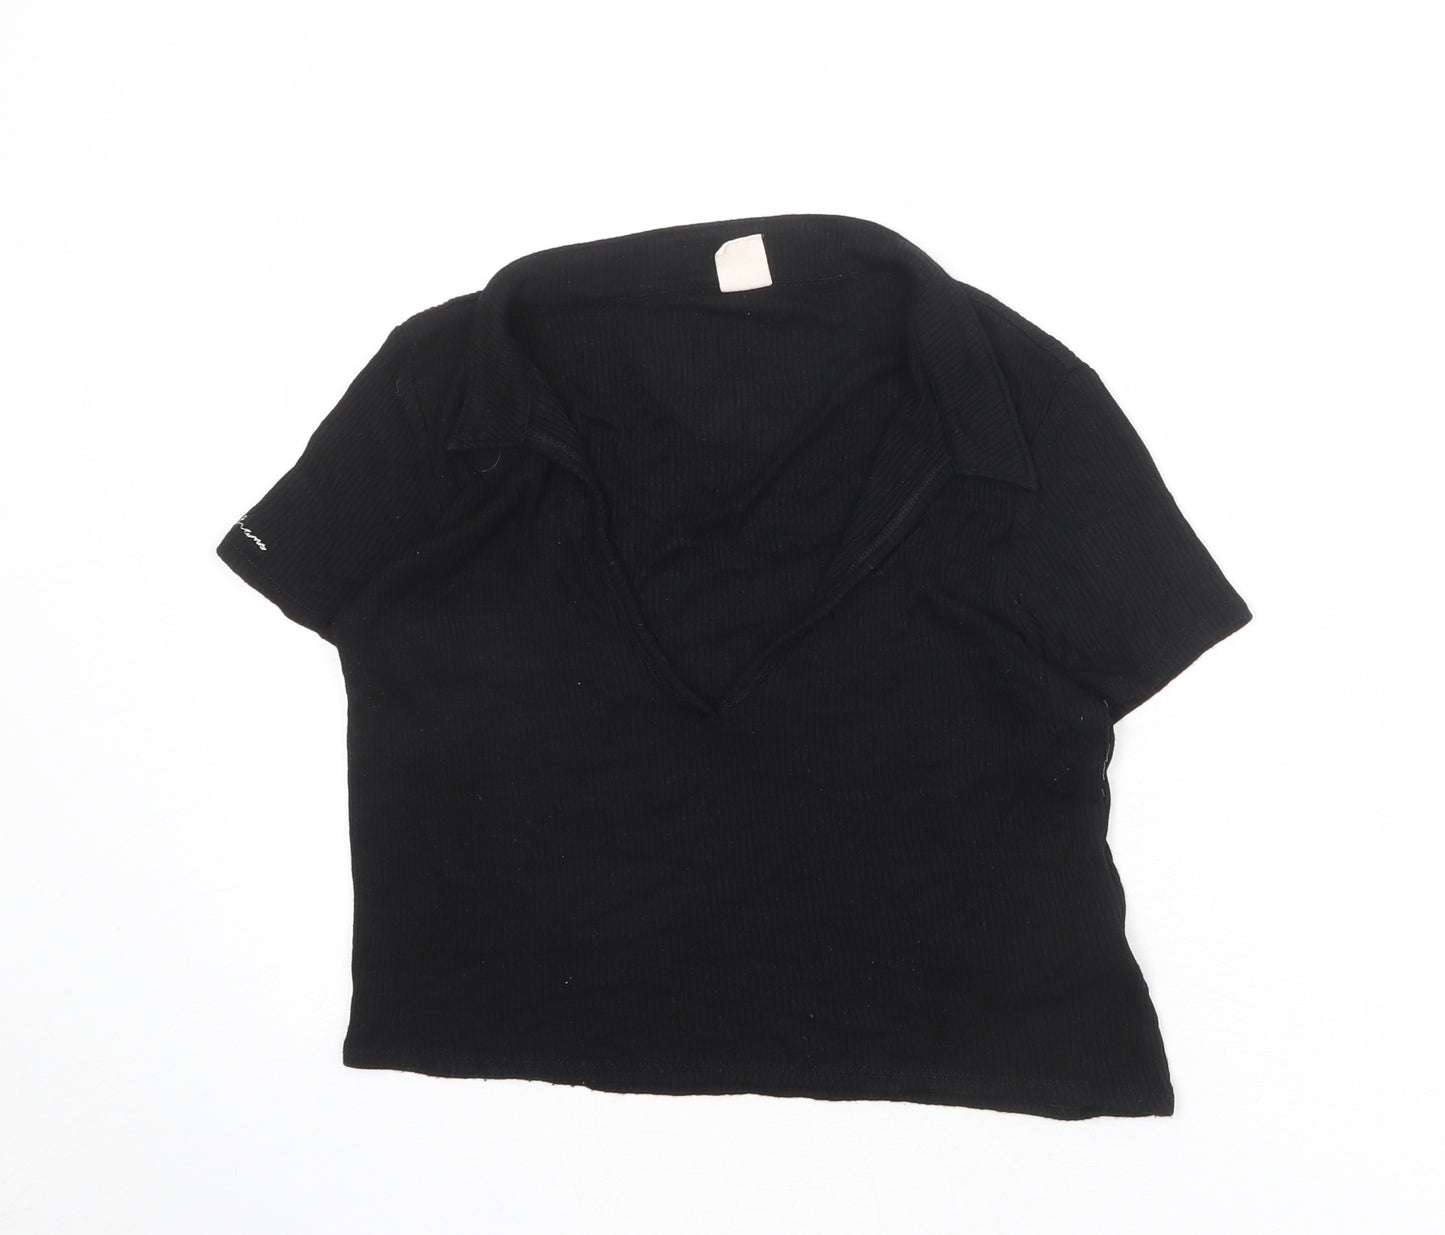 Urban Outfitters Womens Black Viscose Basic T-Shirt Size L Scoop Neck